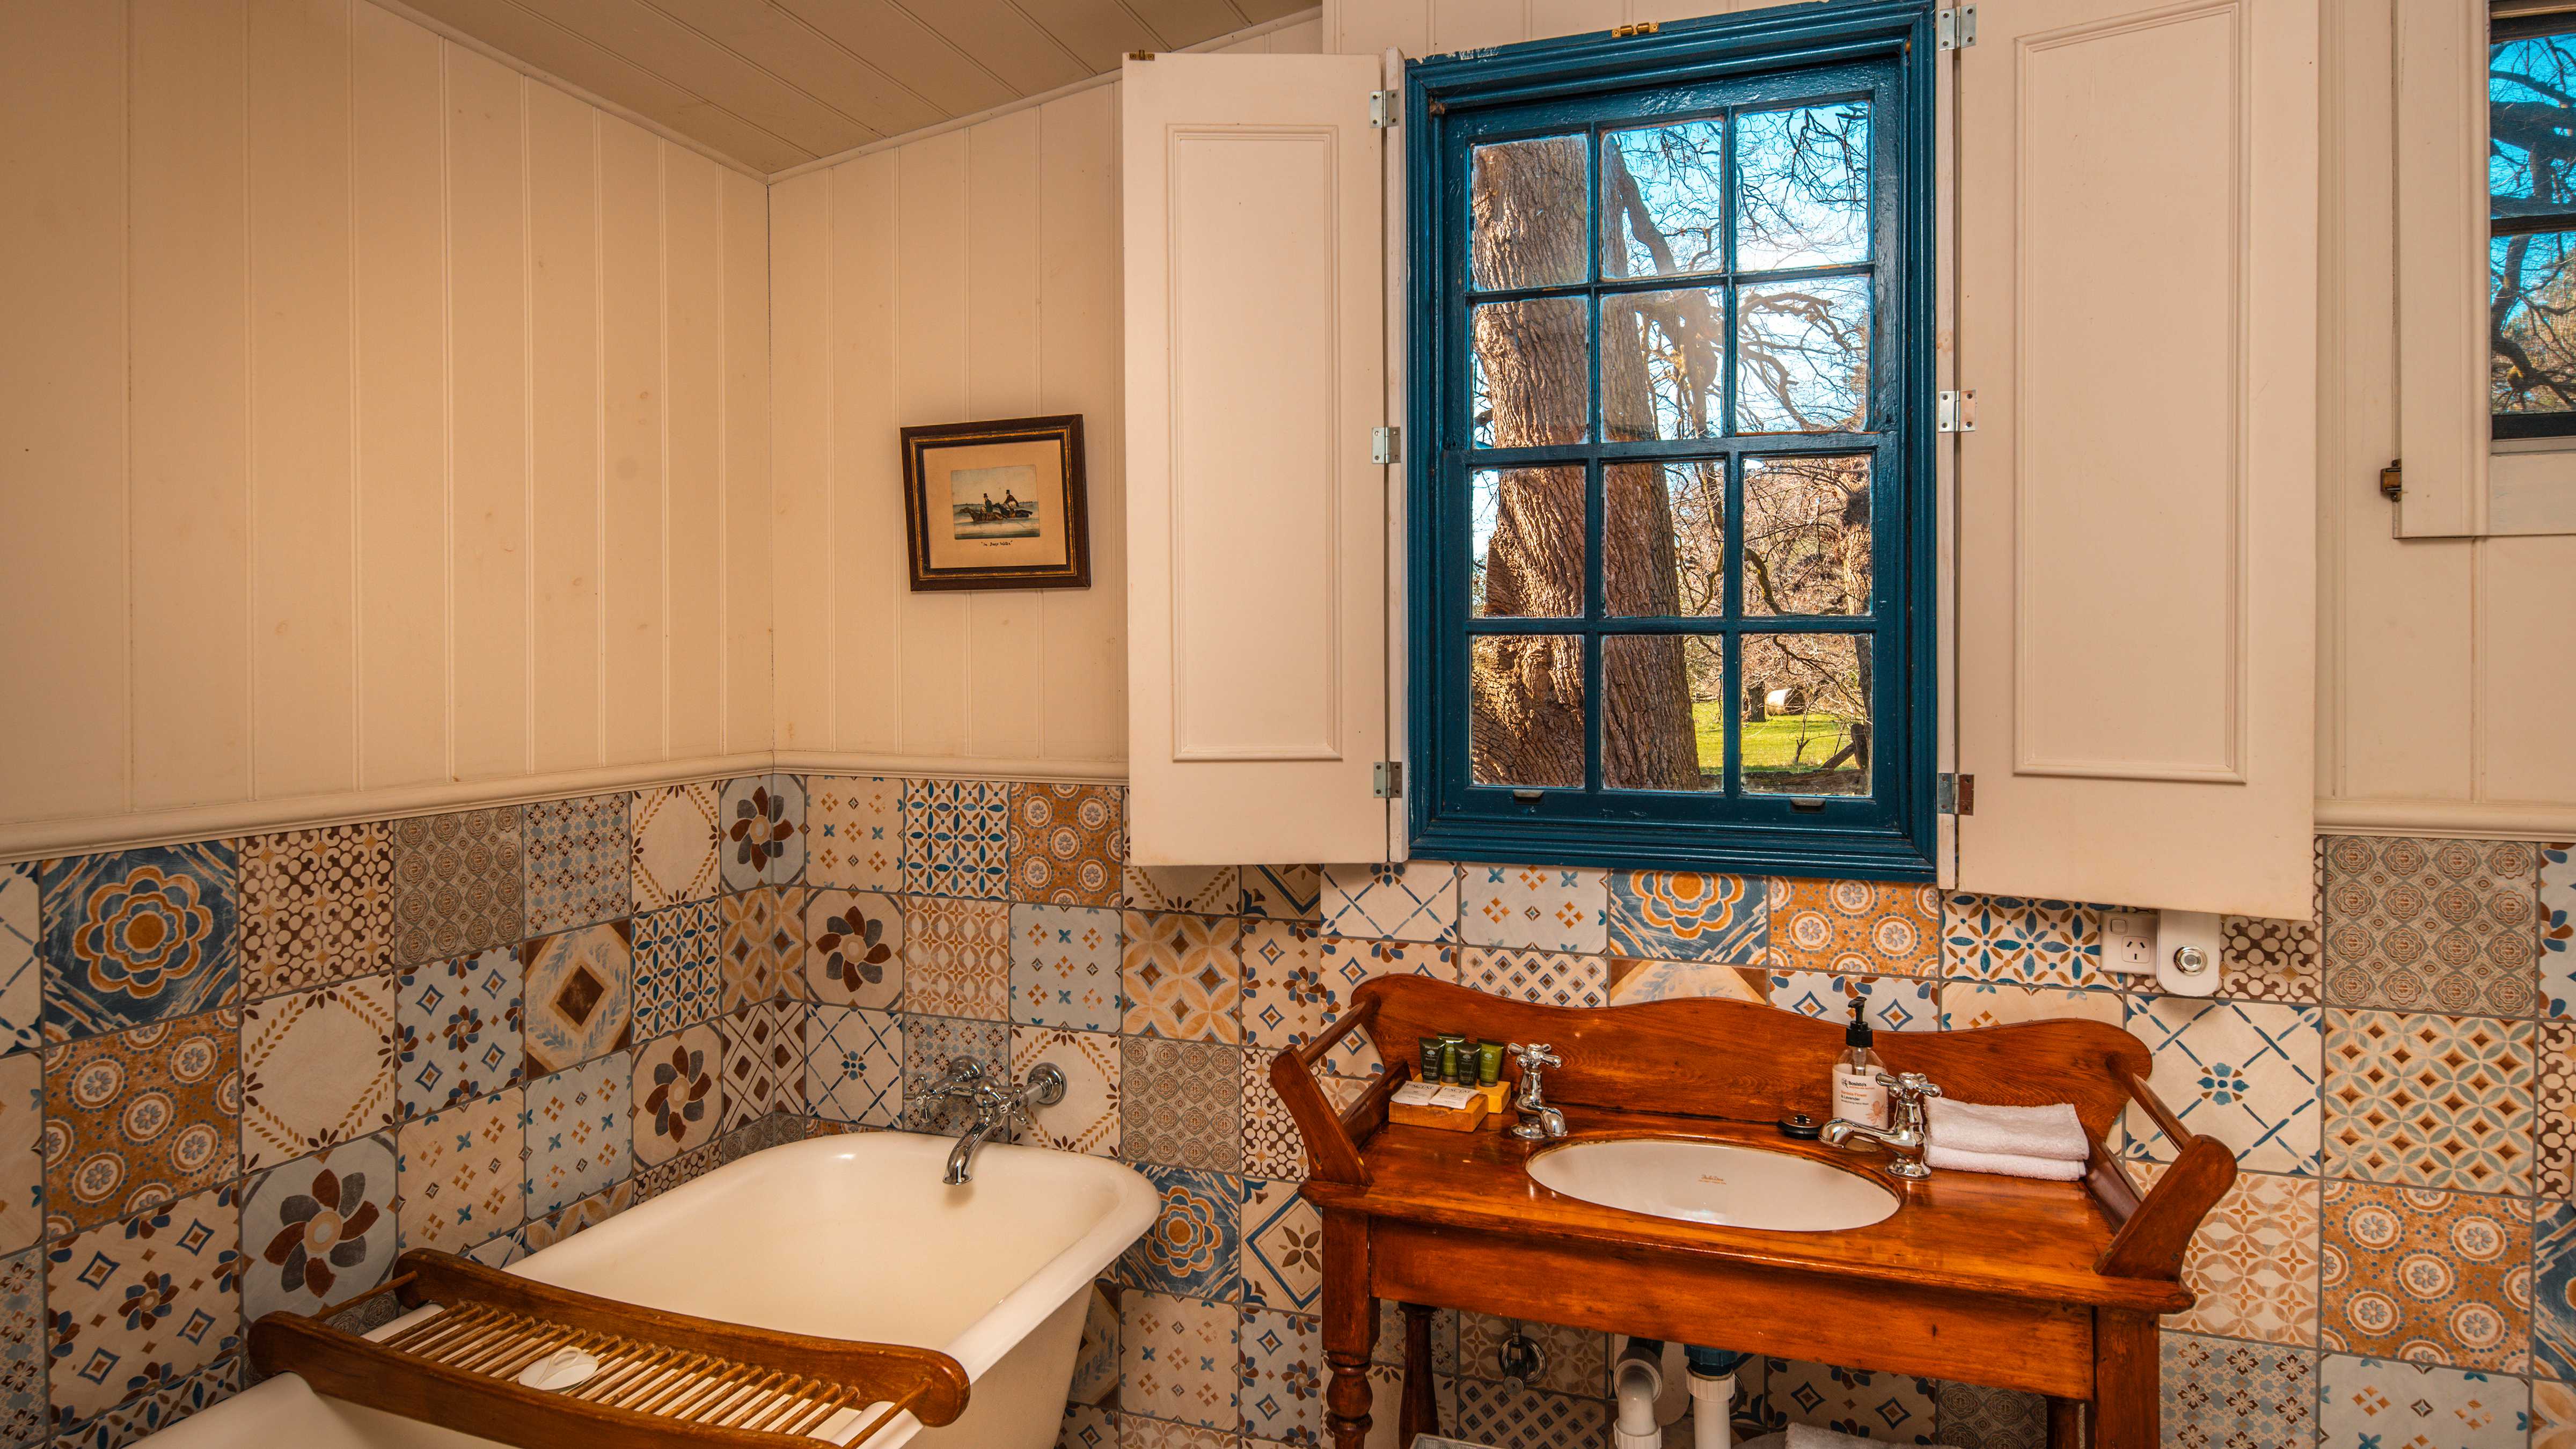 The bathroom walls have a decorative tiling dedo with white painted timber panelling above. The blue painted paned window has shutters on the side and looks out to a large tree and field beyond. A timber washstand has a white oval basin with two pillar taps and a selection of bathroom items on top. An old fashioned white bath has a timber rack across it. Photo: Rob Burnett.